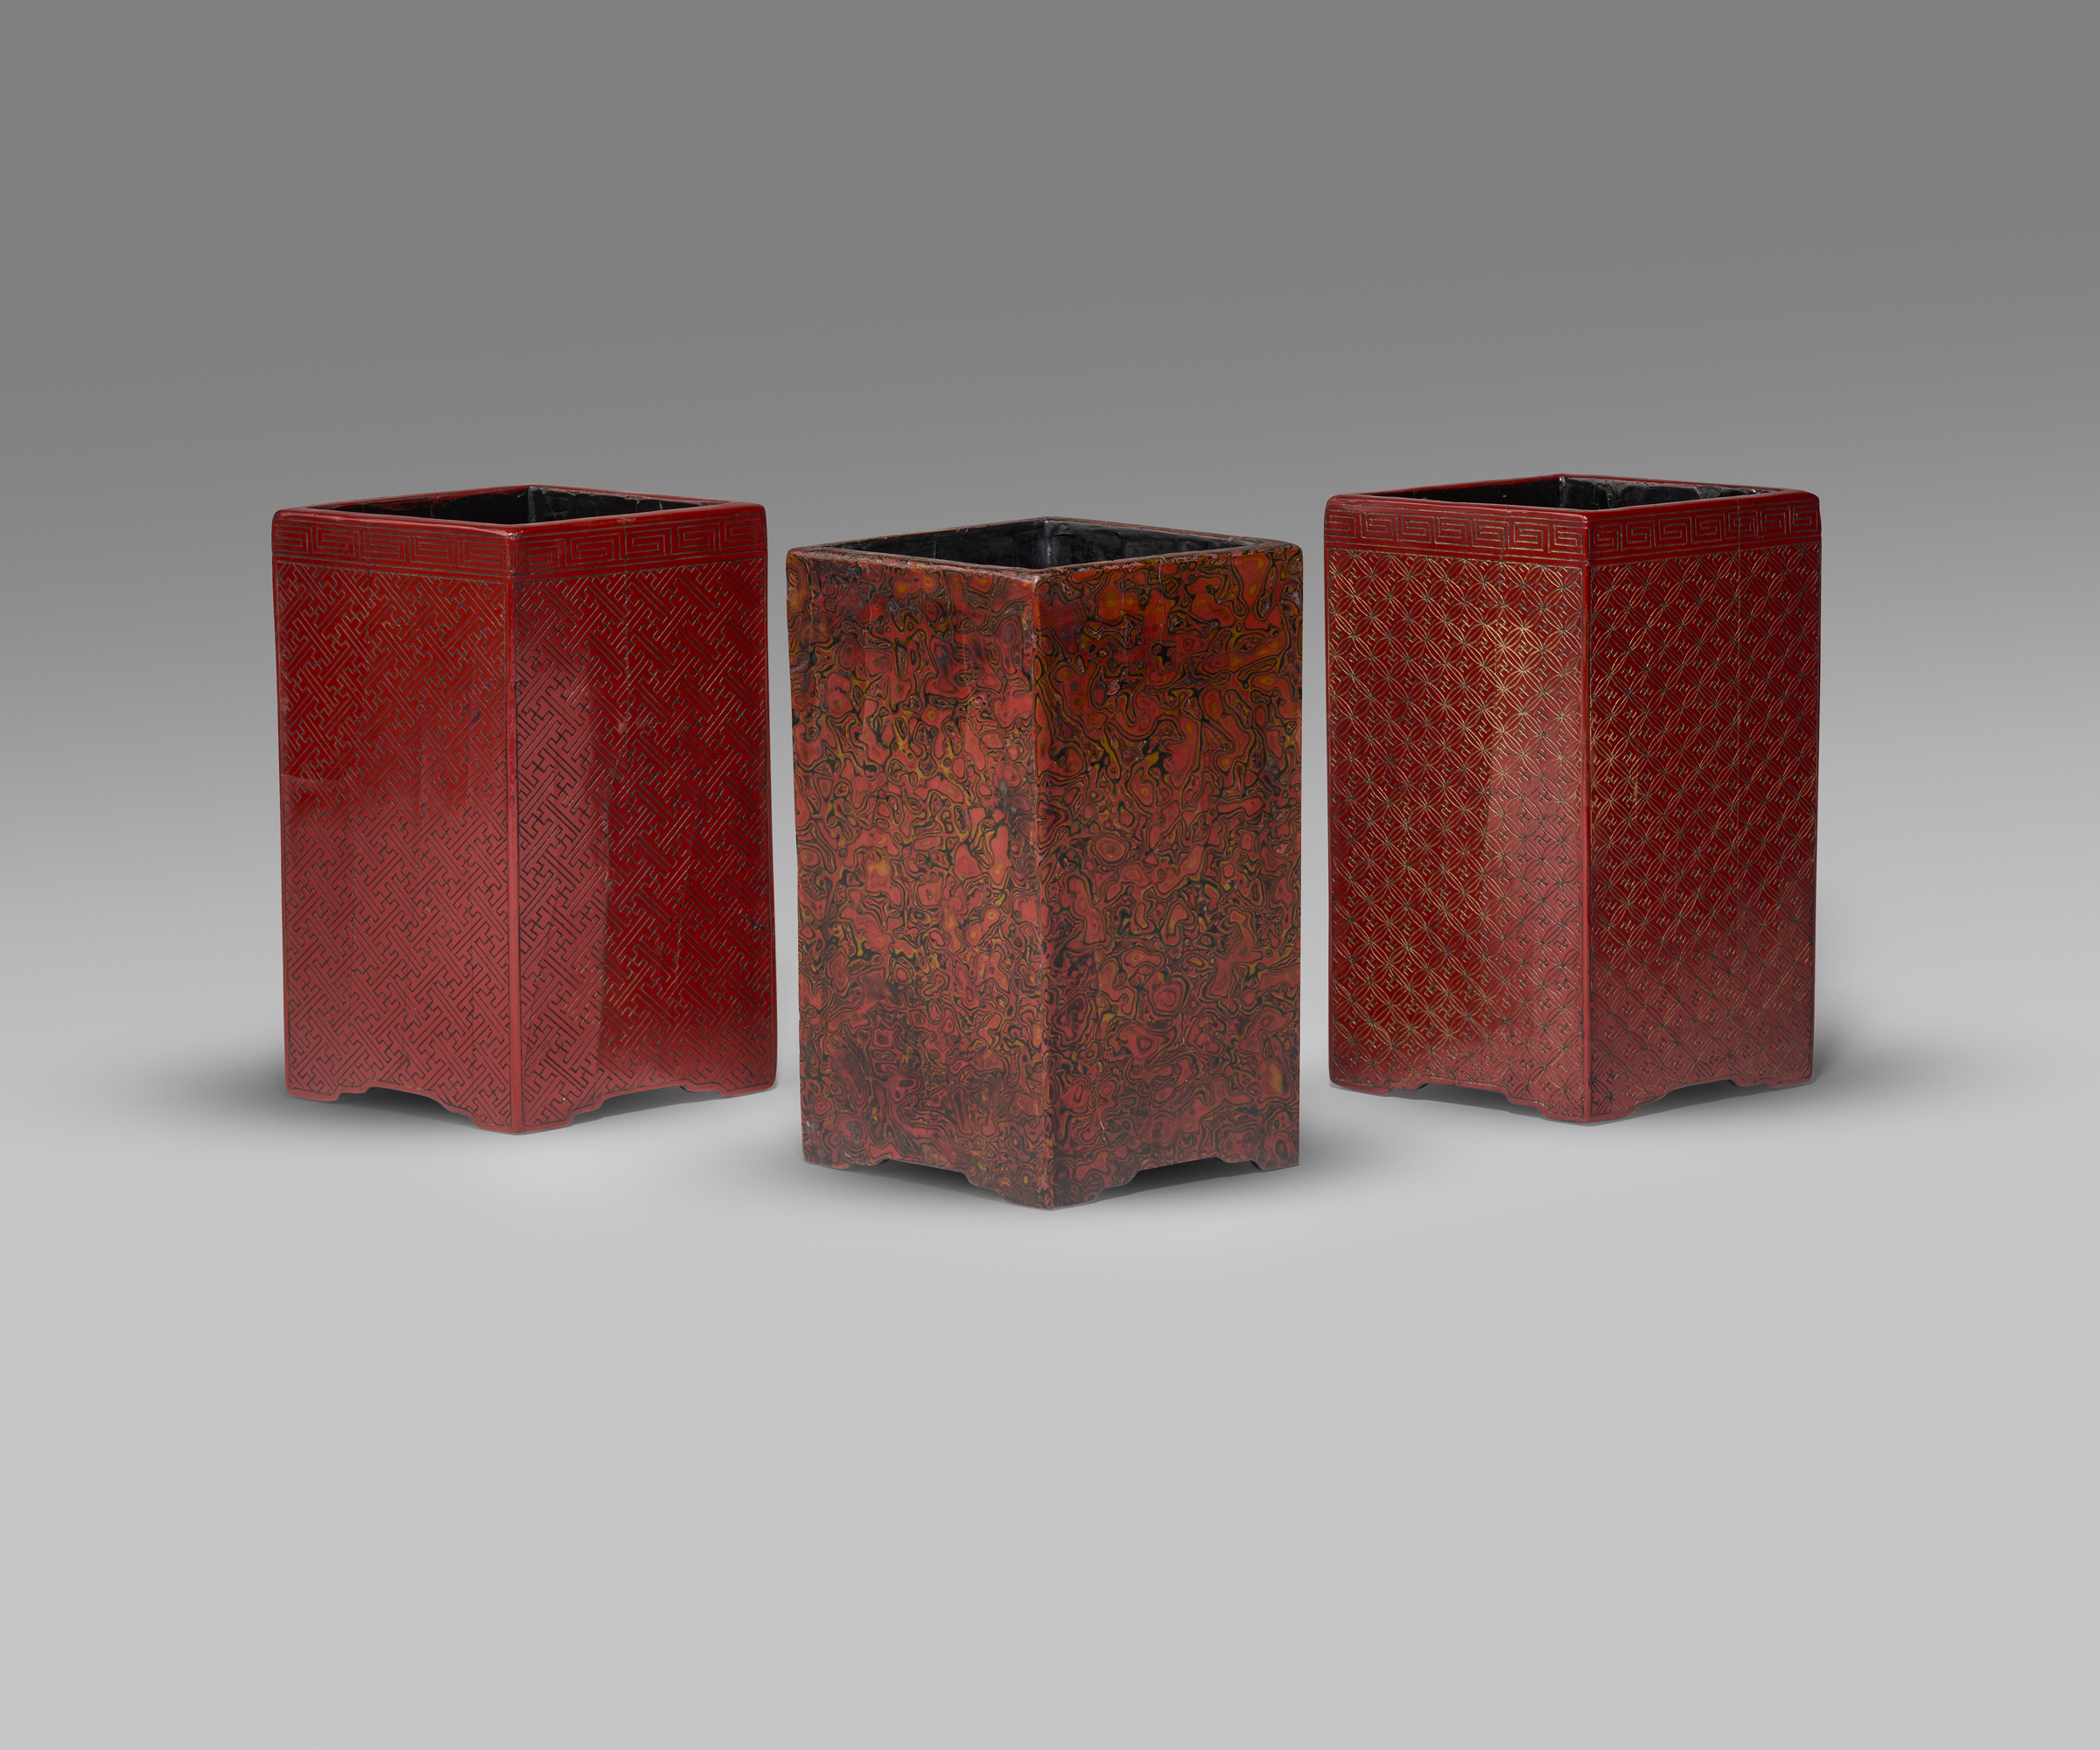 A group of three rhombic or diamond shaped lacquer brush pots (Wanli mark and period, 1573-1619)